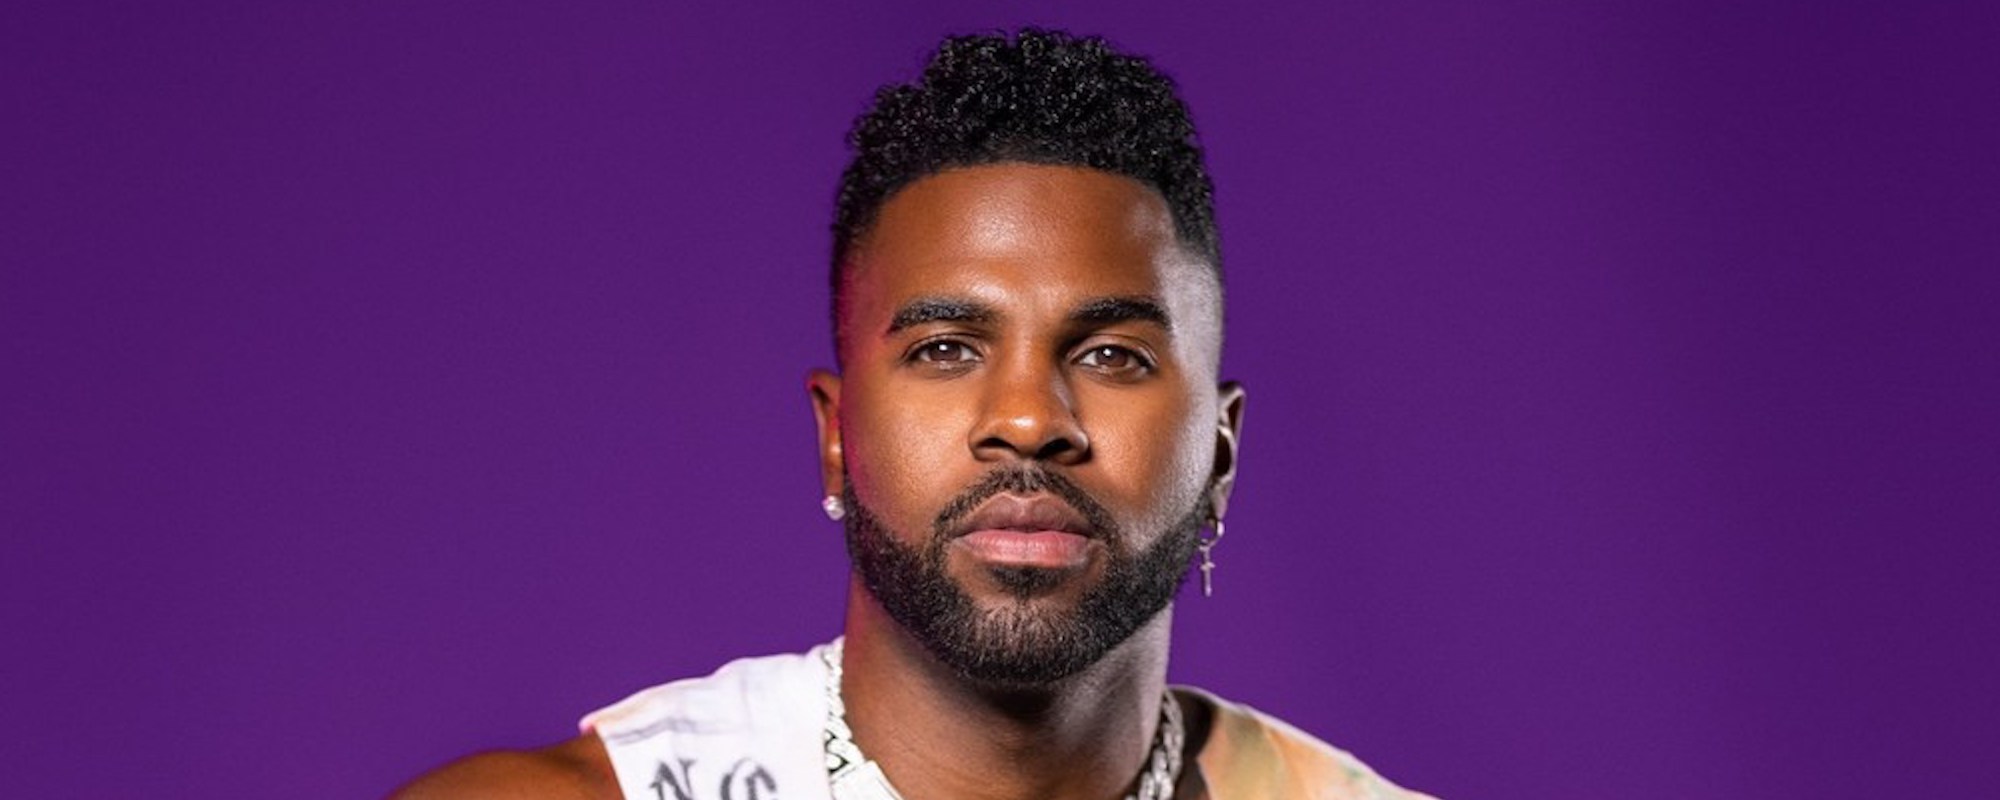 Warner Music Launches Podcast Network with Shows Led by Jason Derulo, Lupita Nyong’o, and Billy Mann